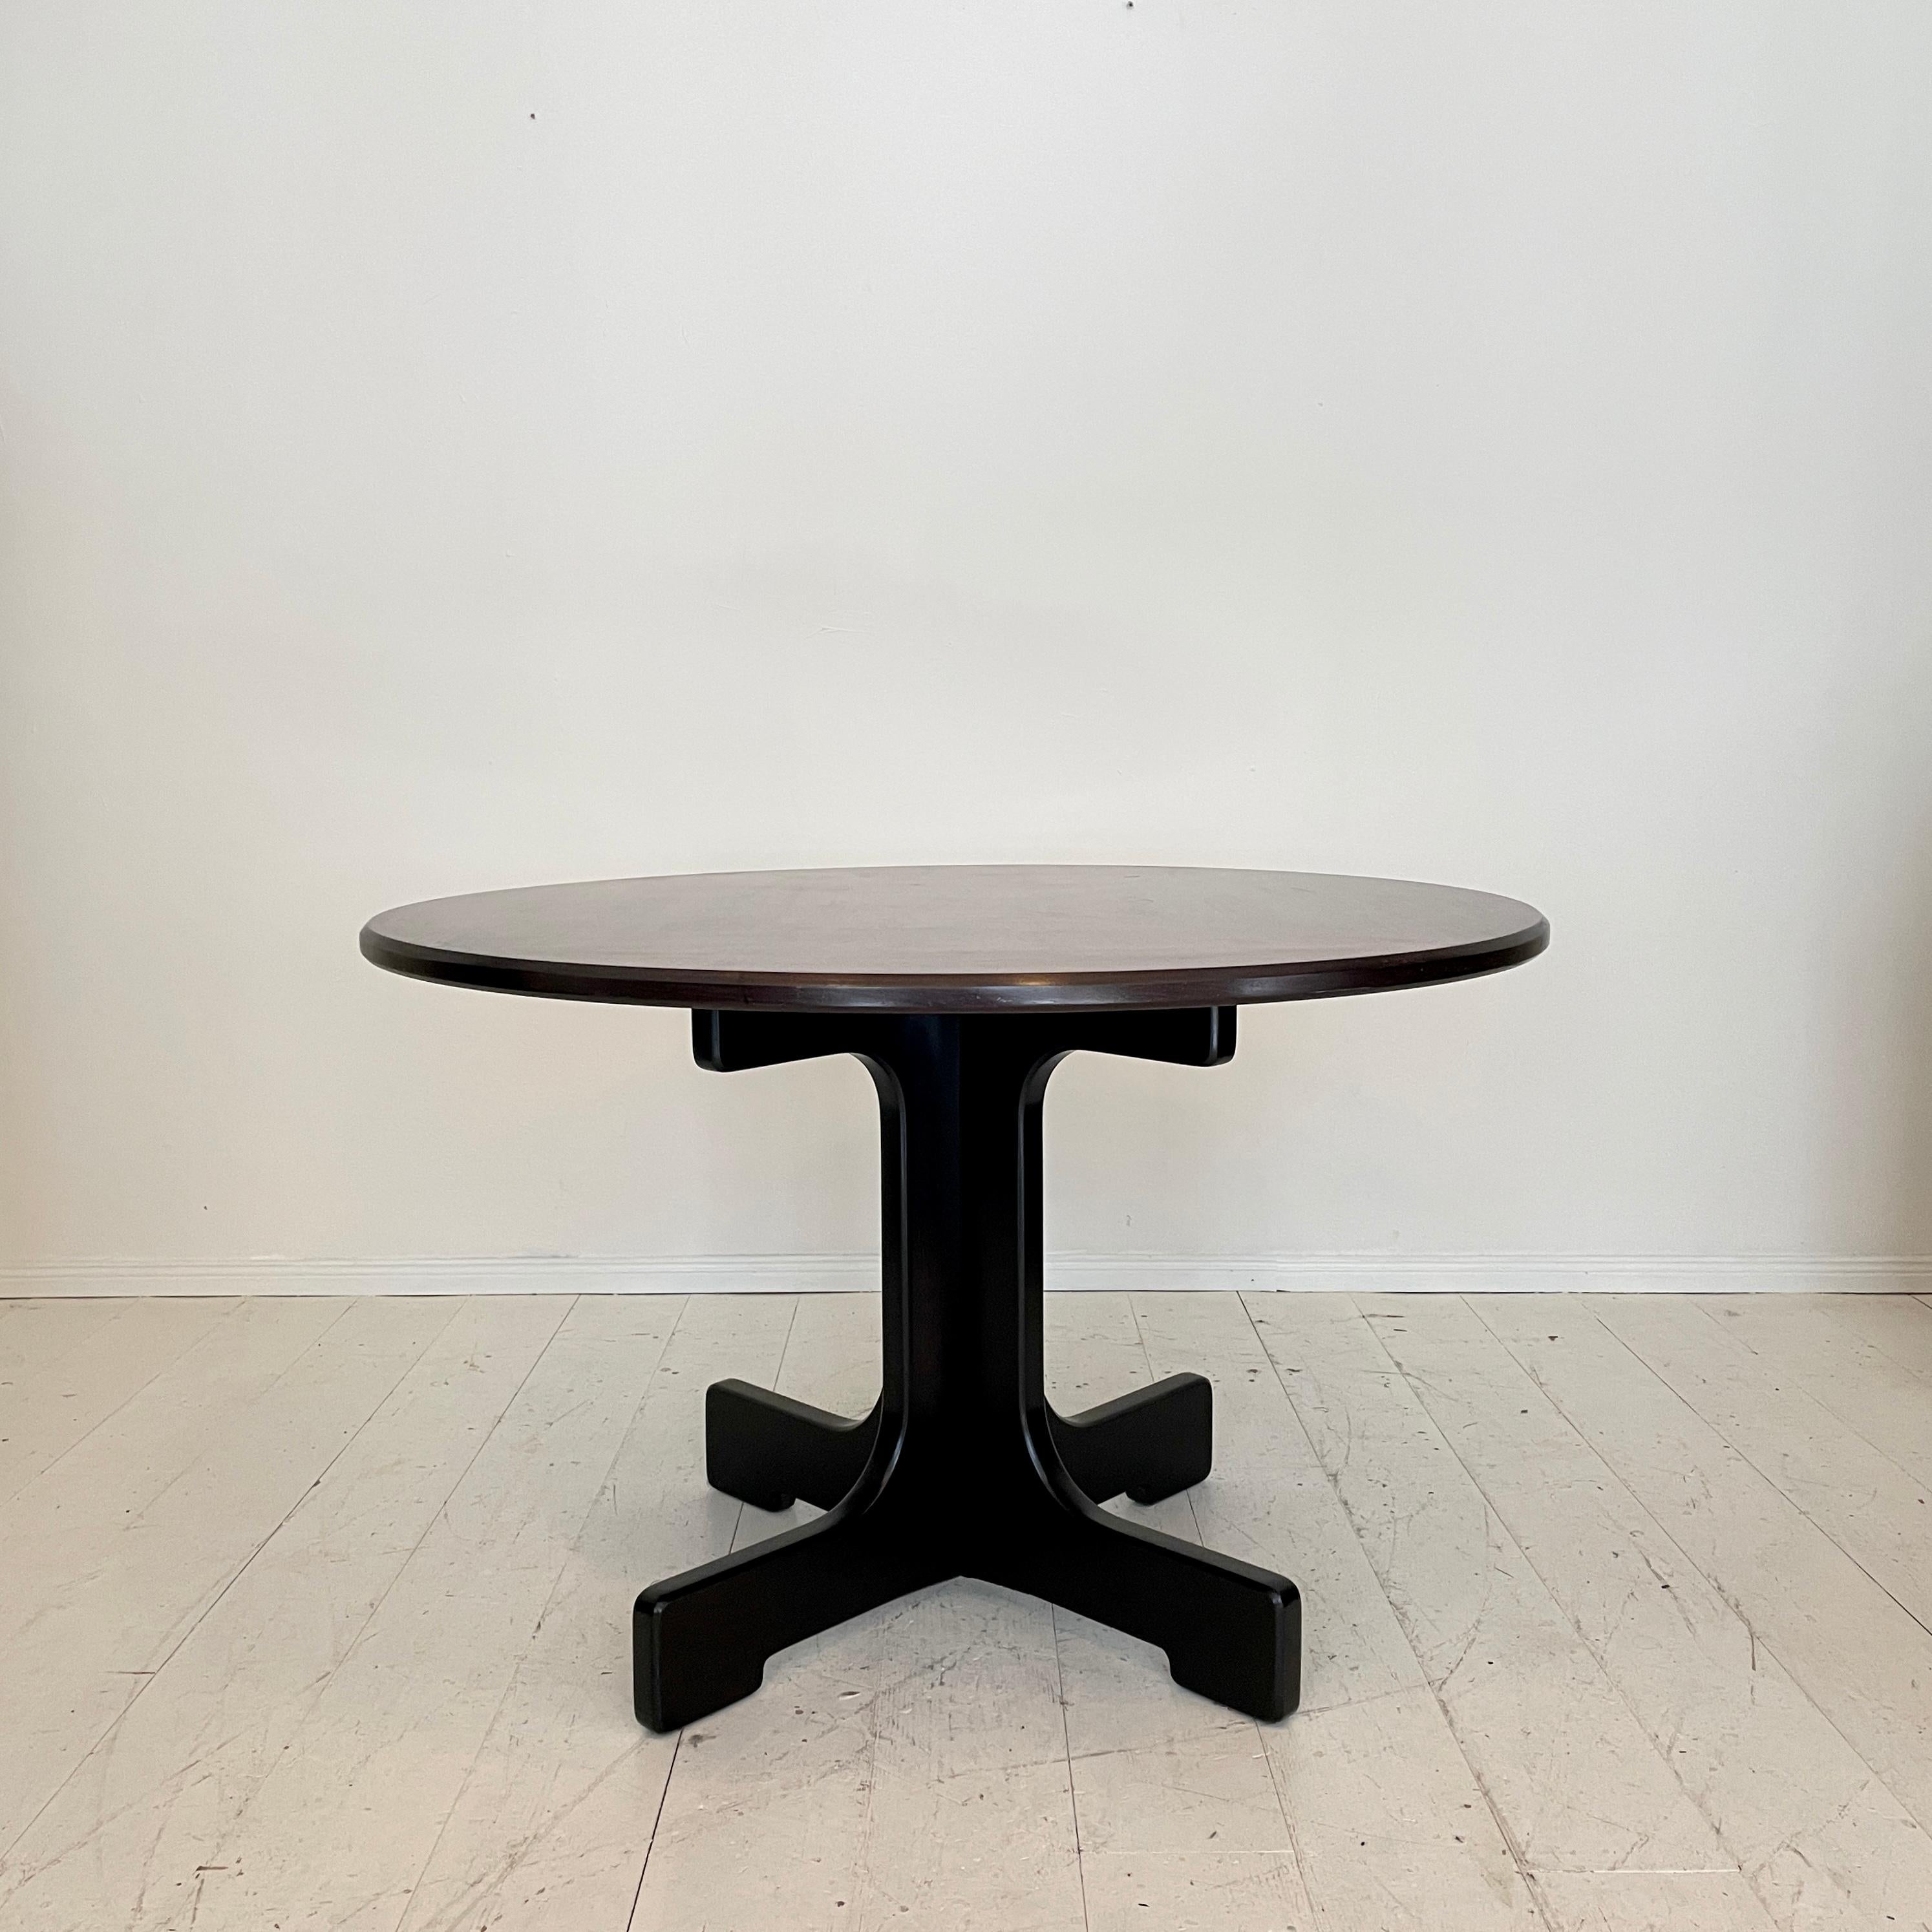 This beautiful Mid Century Italian Round Dining Table comes with a Fantastic Brown Red Santos Veneer and was made in the 1980s. 
Great vintage condition of the table. 
A unique piece which is a great eye-catcher for your antique, modern, space age